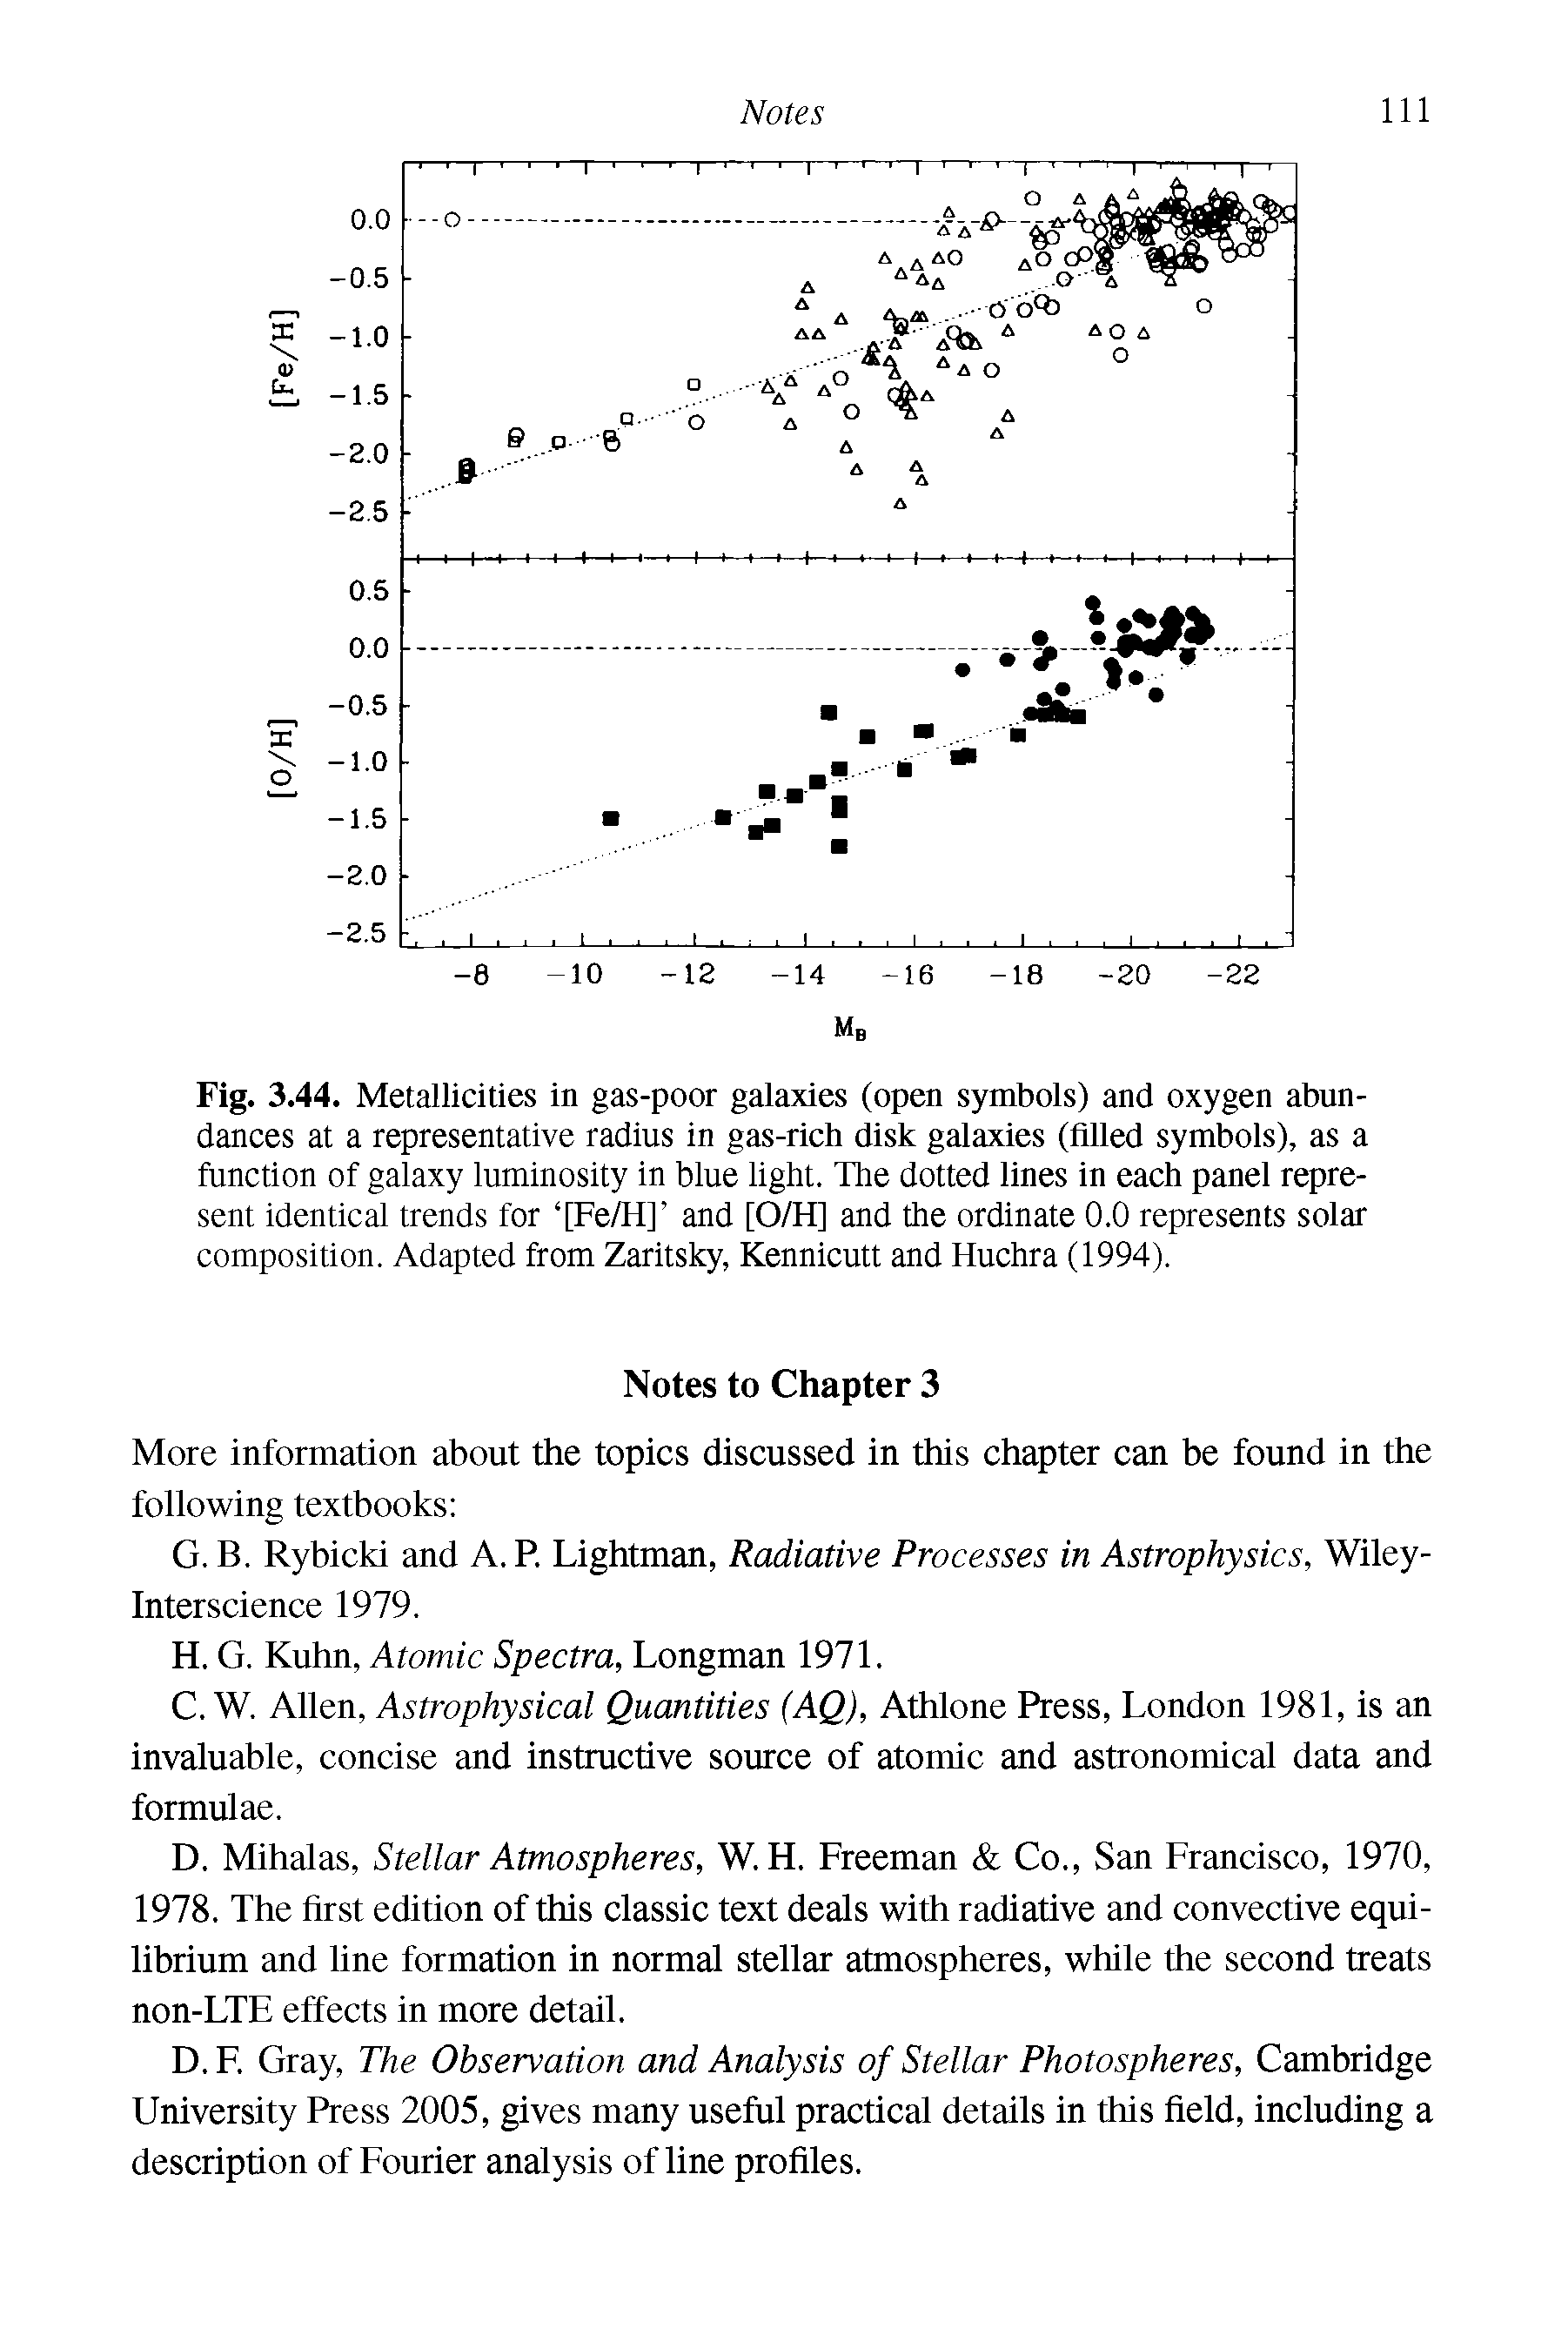 Fig. 3.44. Metallicities in gas-poor galaxies (open symbols) and oxygen abundances at a representative radius in gas-rich disk galaxies (filled symbols), as a function of galaxy luminosity in blue light. The dotted lines in each panel represent identical trends for [Fe/H] and [O/H] and the ordinate 0.0 represents solar composition. Adapted from Zaritsky, Kennicutt and Huchra (1994).